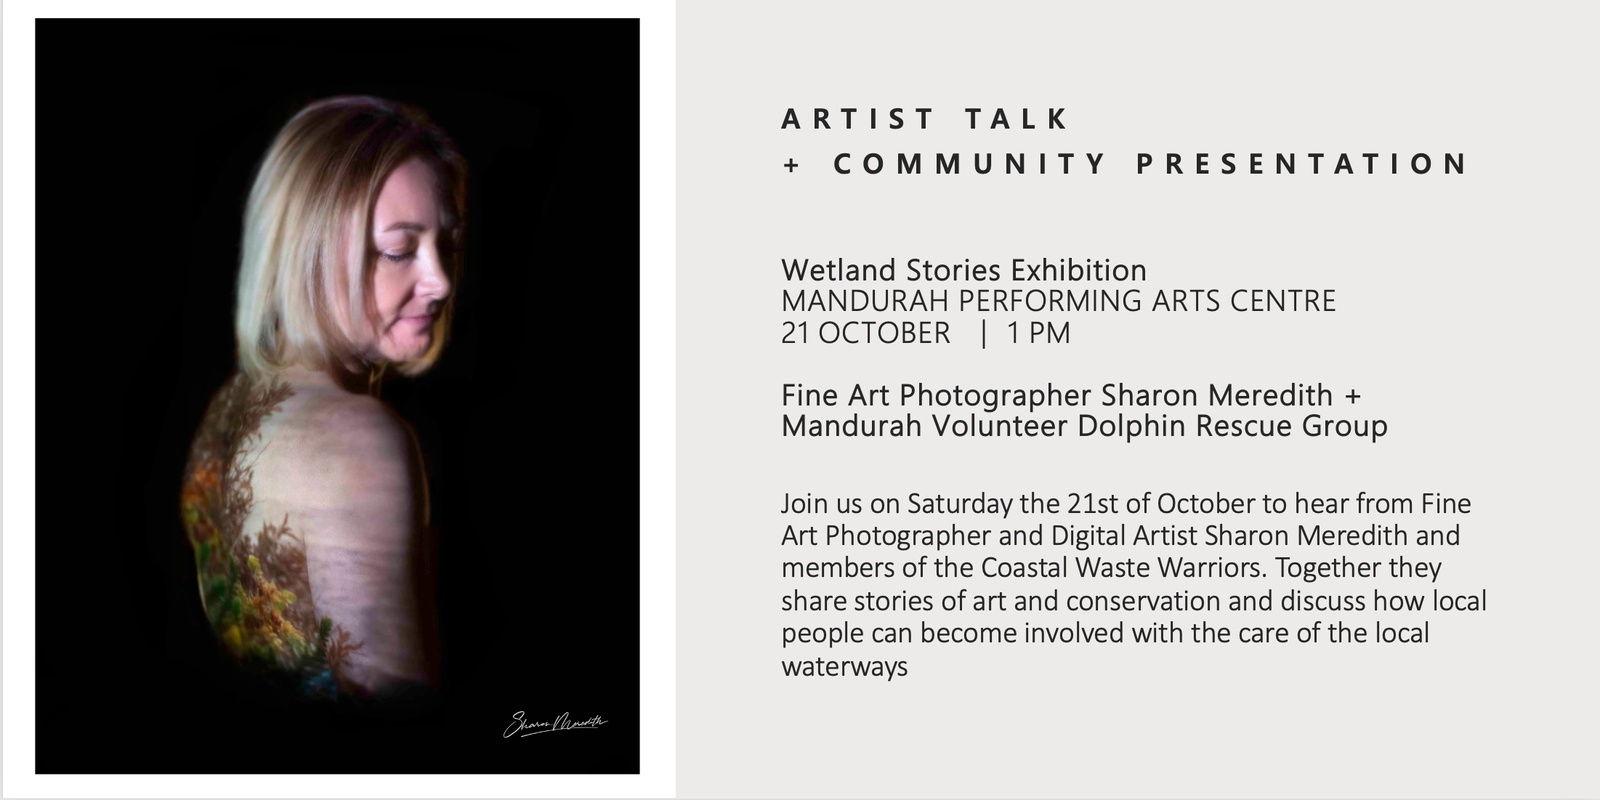 Banner image for Wetland Stories, Artist Talk and Community Presentation - Sharon Meredith and Coastal Waste Warriors